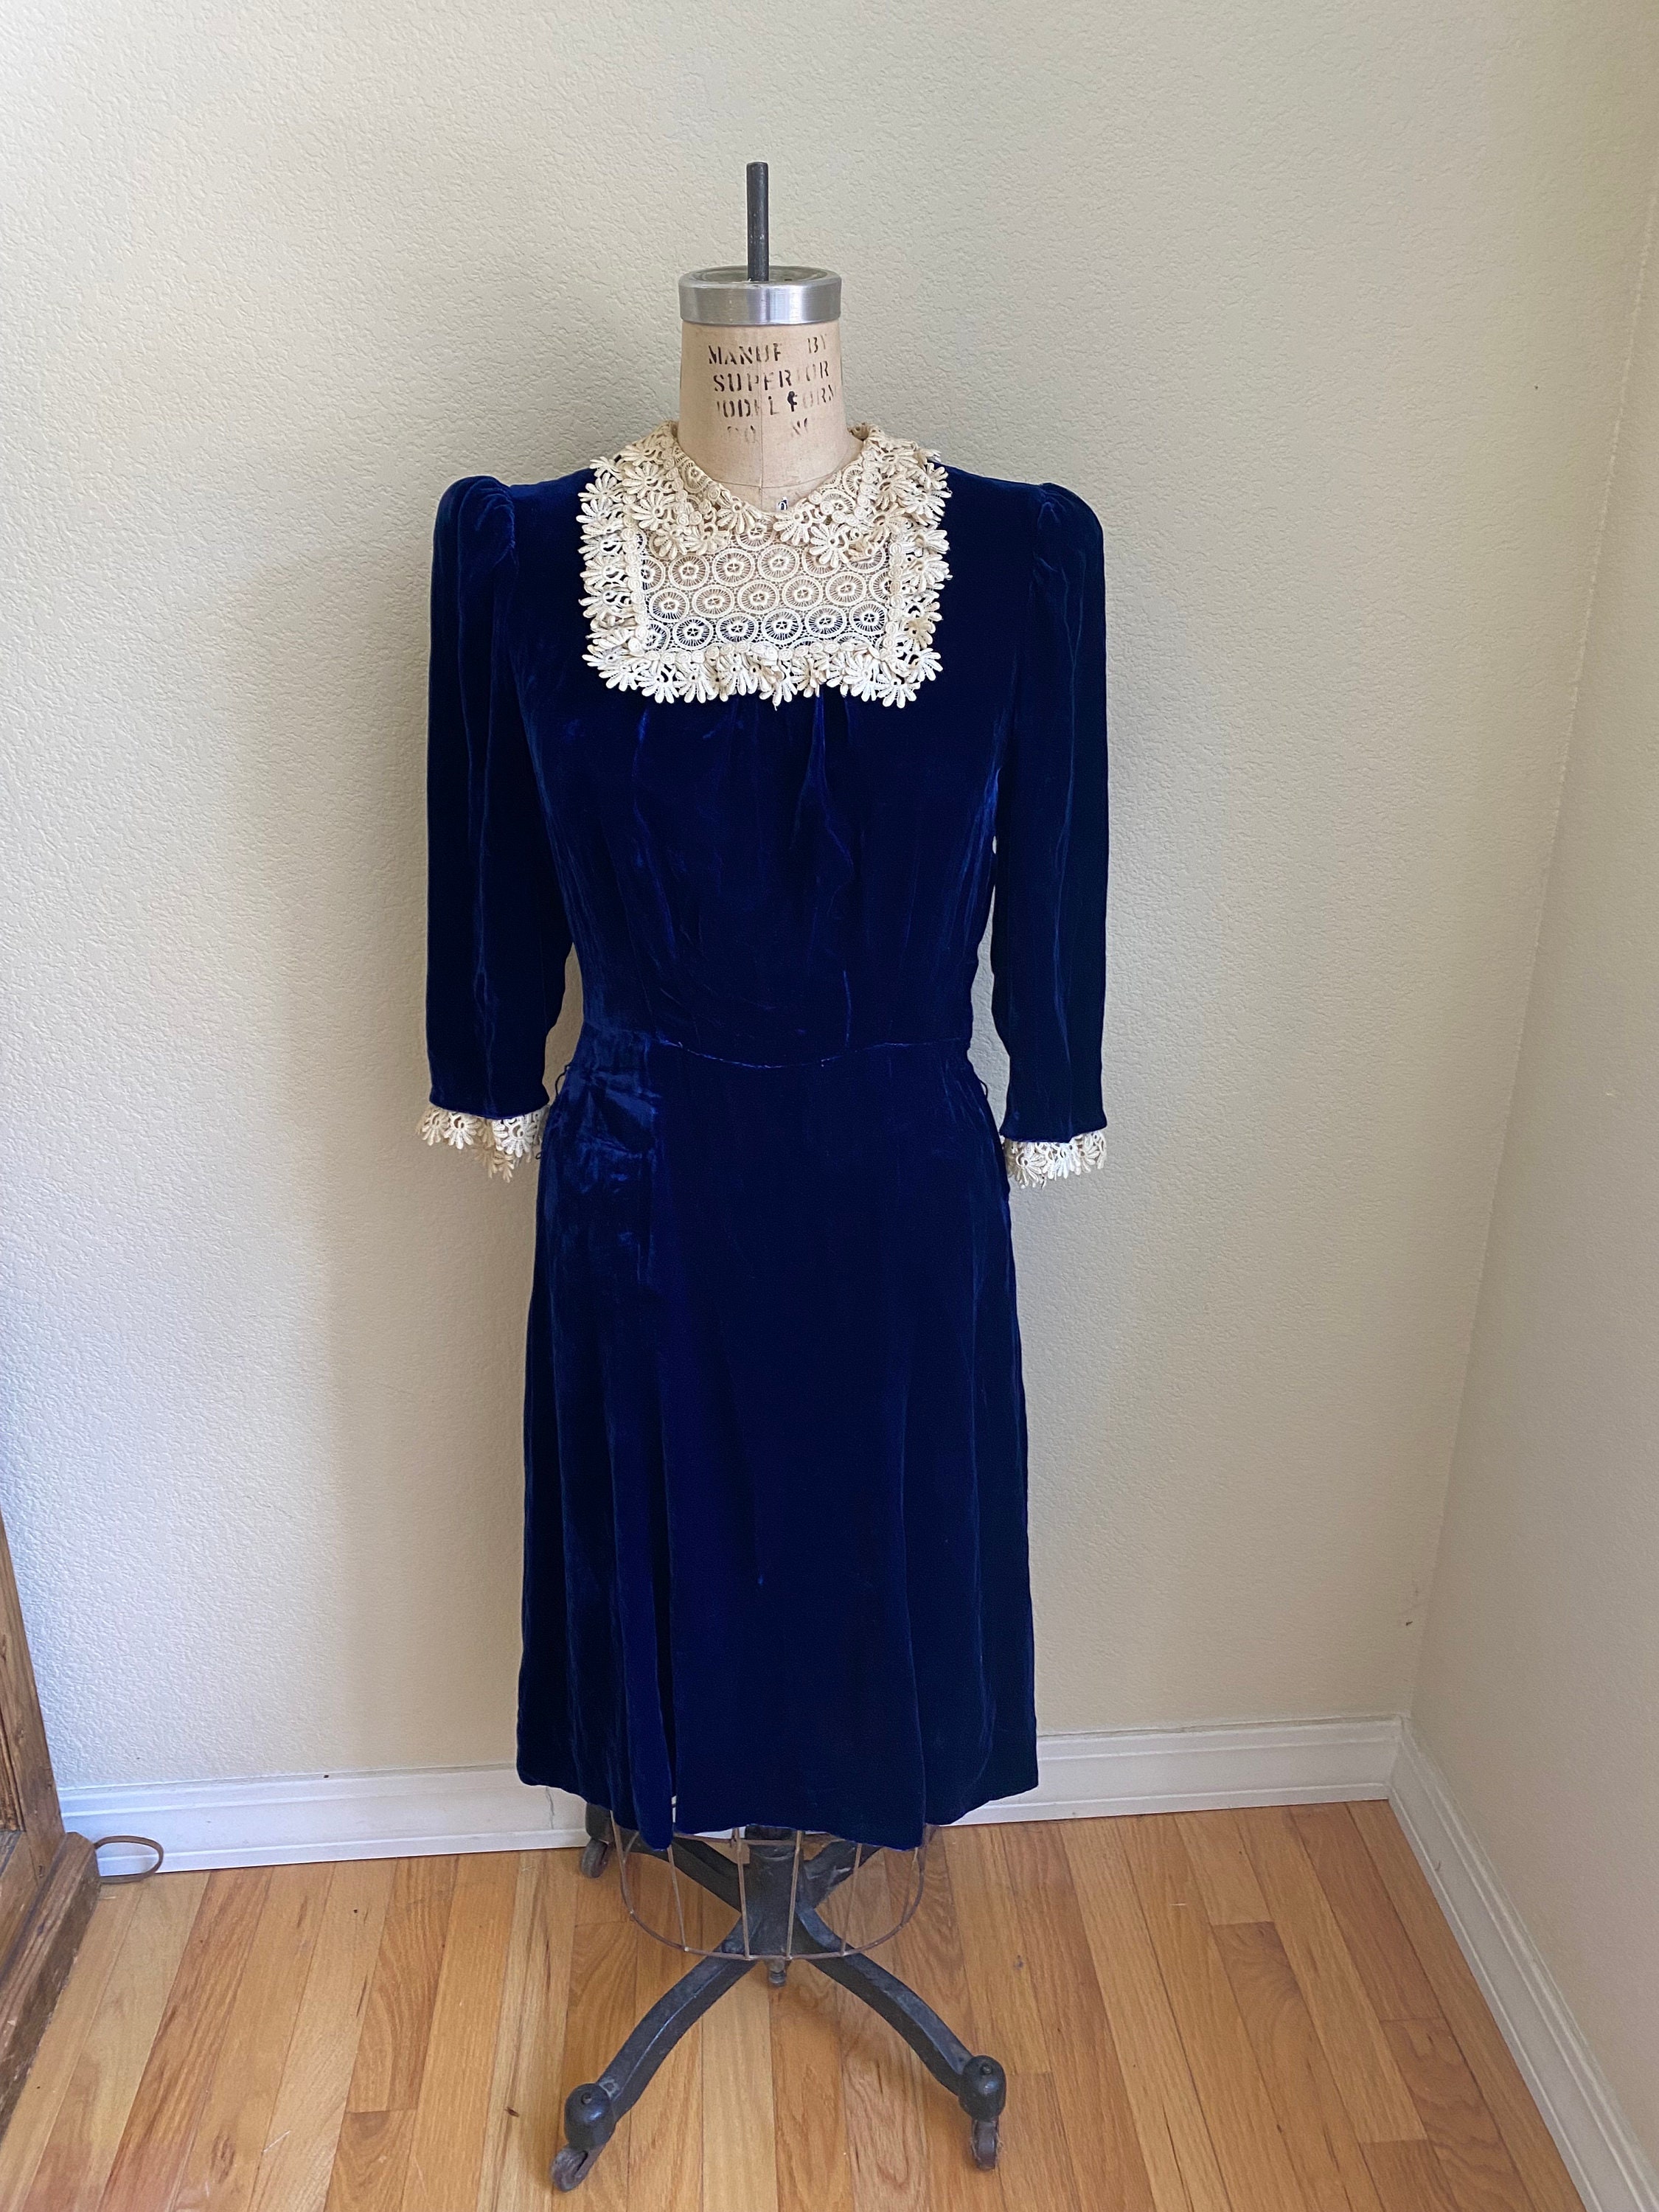 Sherry Lace Sequin Fit and Flare Dress in Navy